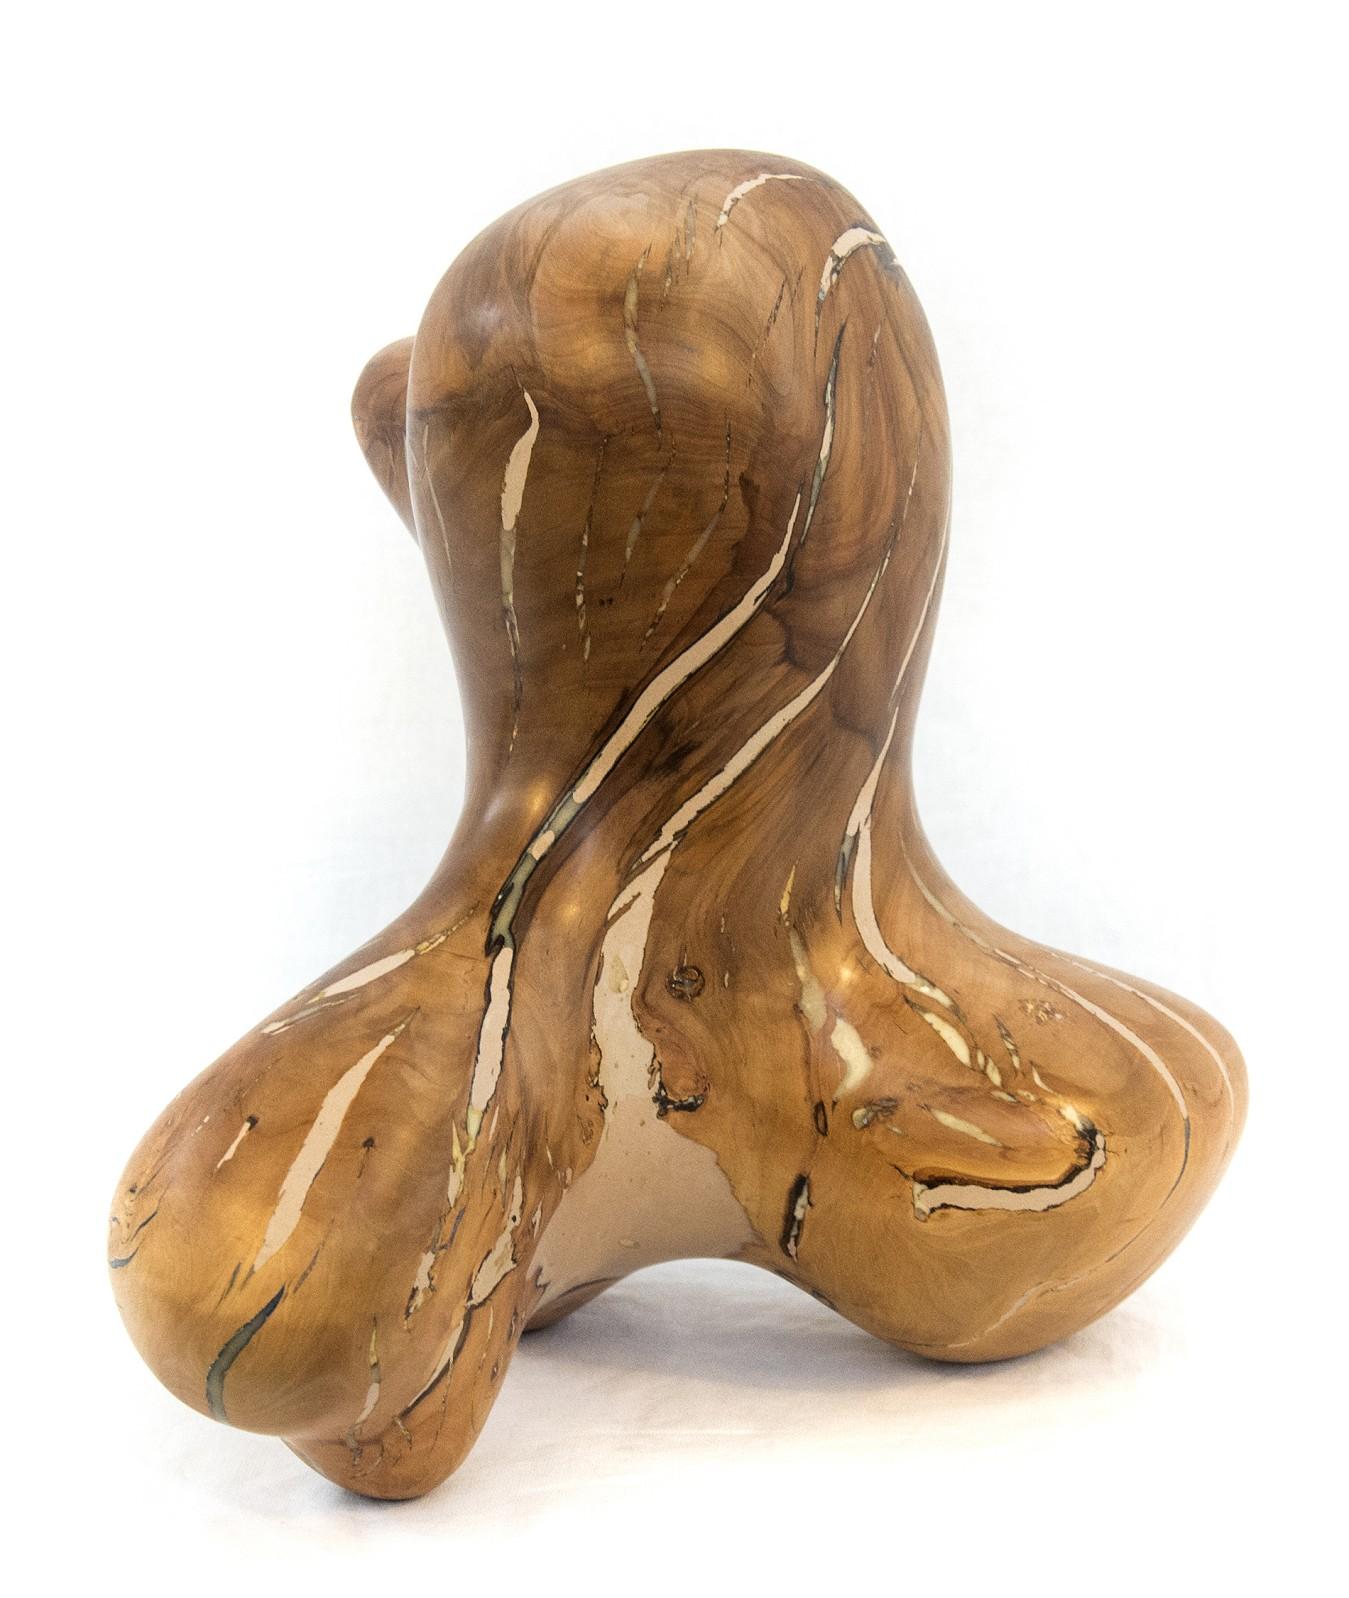 Windfall Series No 03 - small, smooth, abstract, natural wood carved sculpture - Sculpture by Shayne Dark